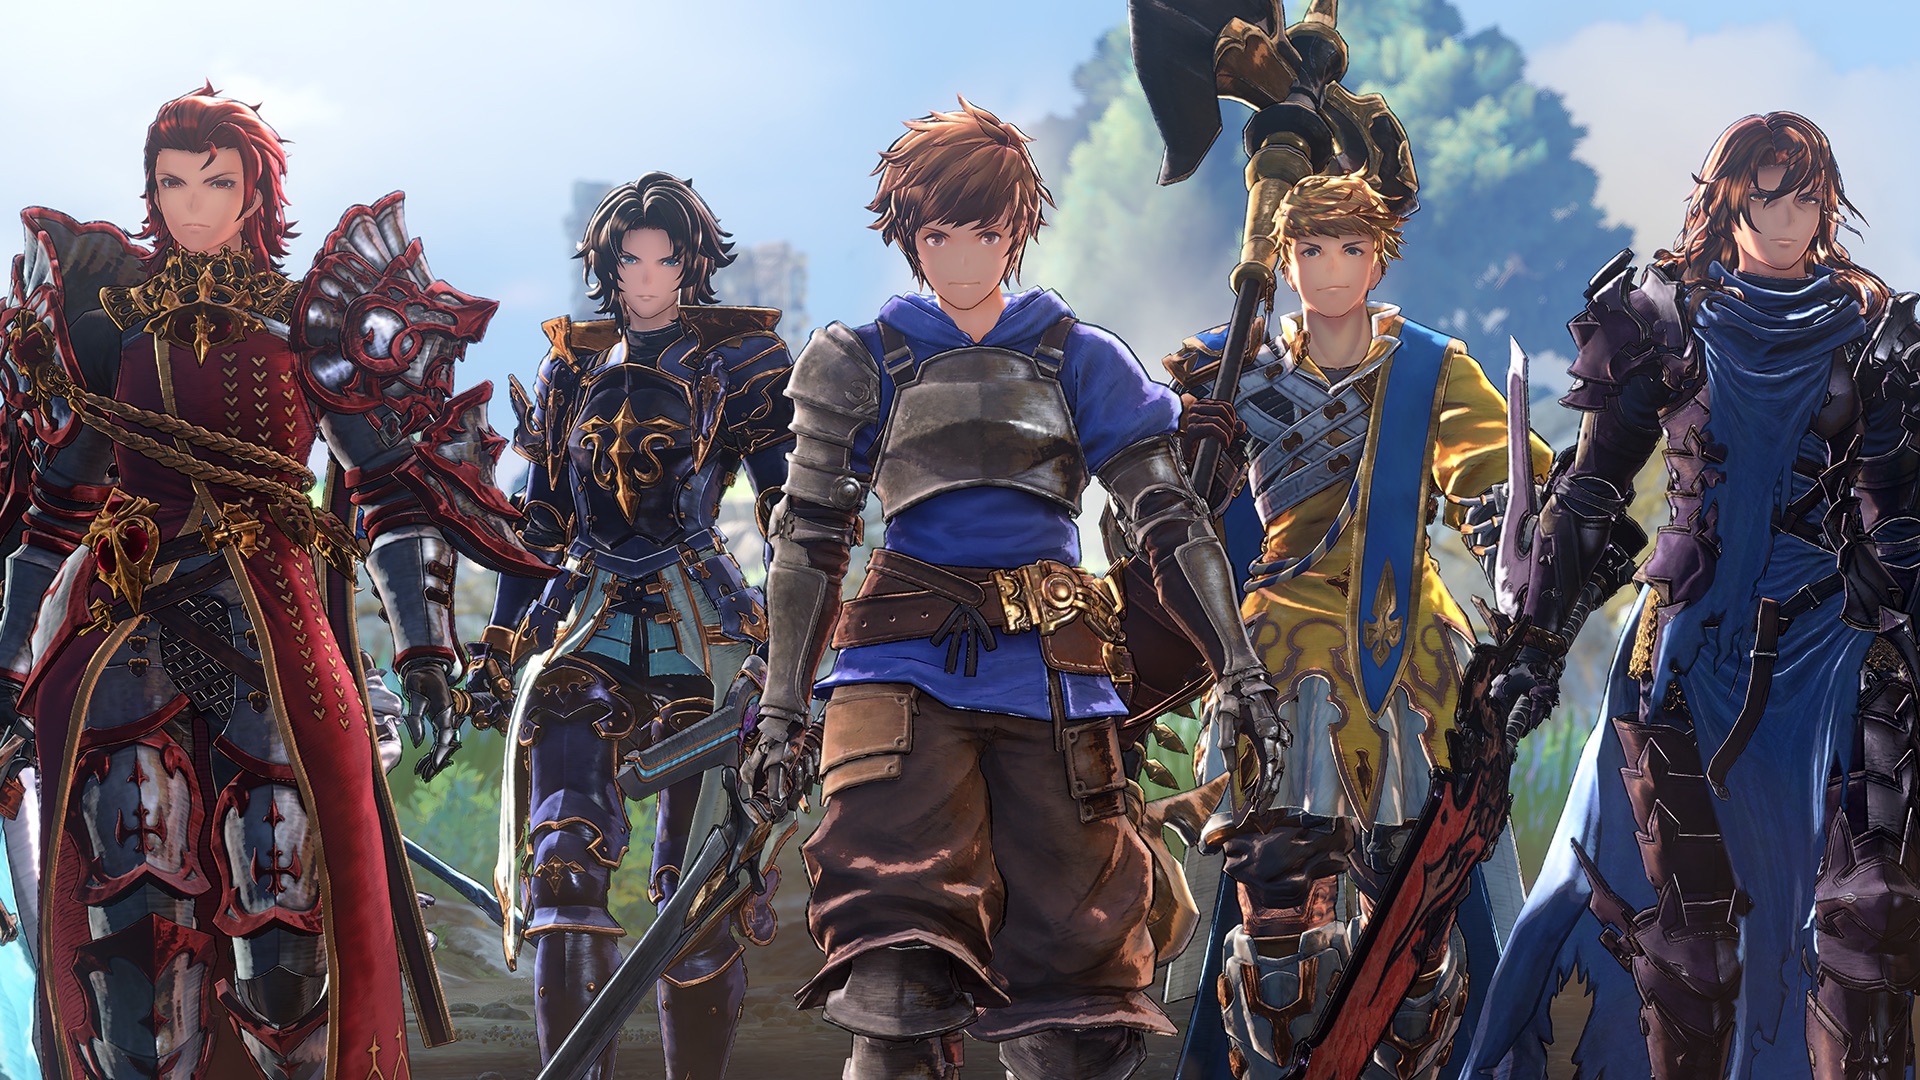 Does Granblue Fantasy: Relink have Early Access? - Dot Esports